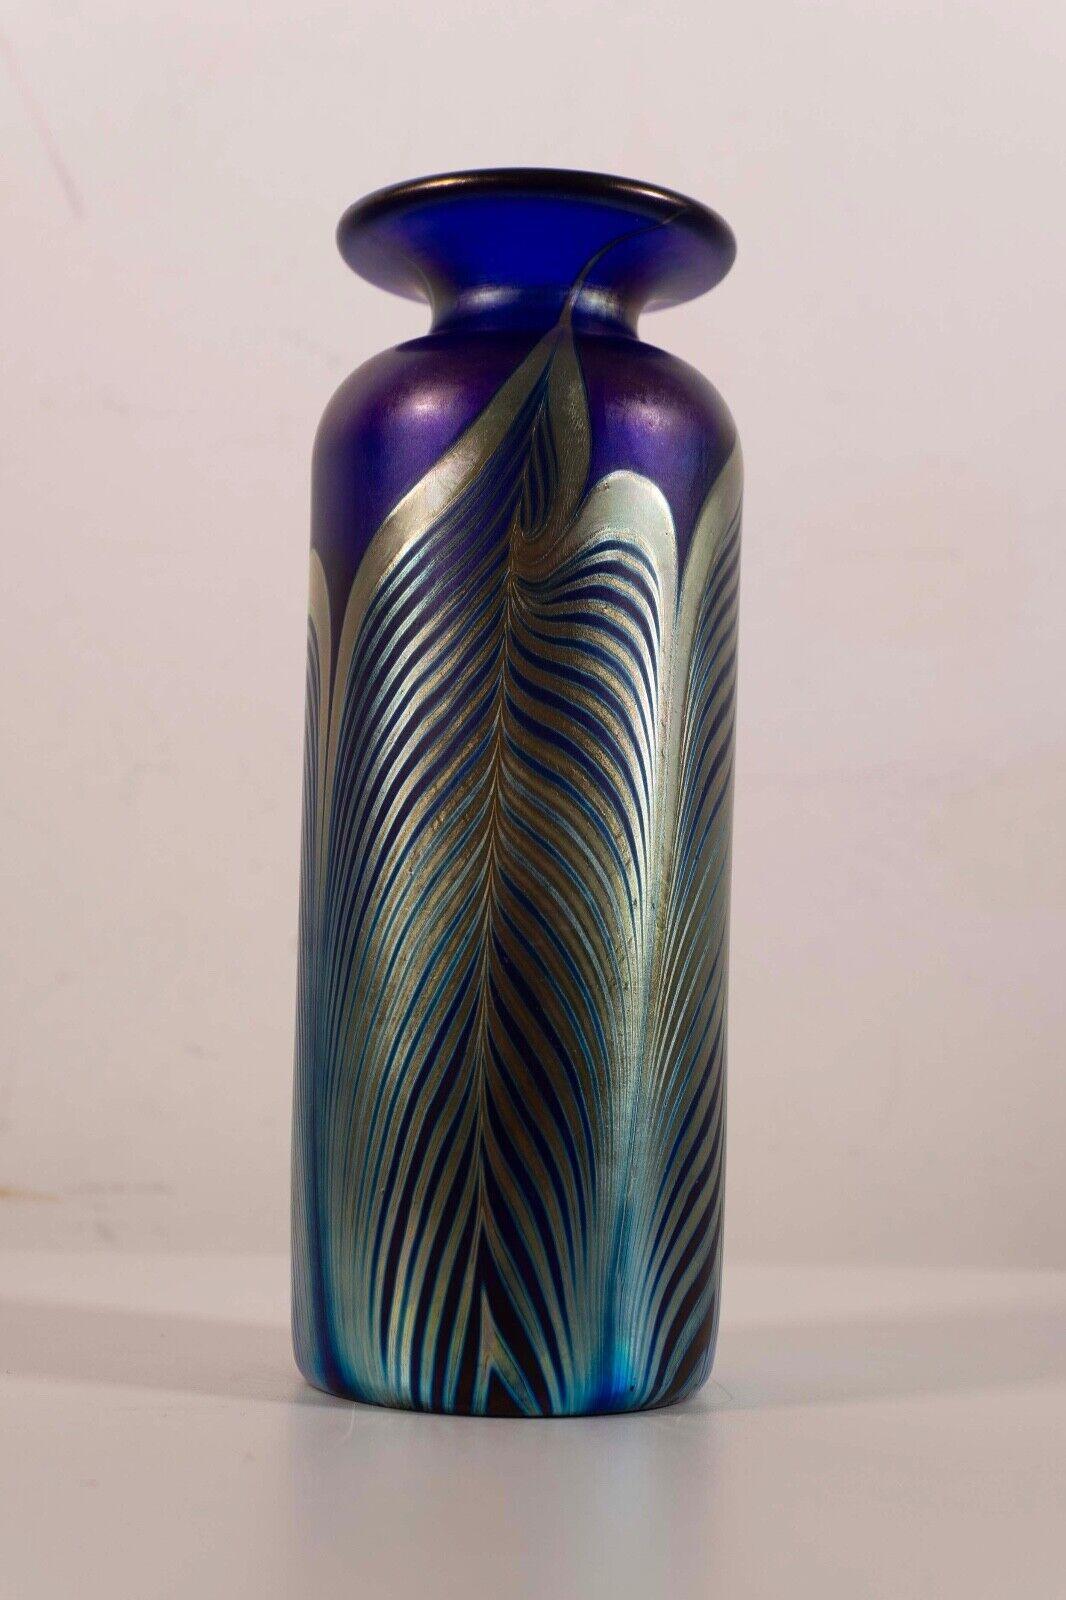 This Stephen Fellerman signed small glass vase beautifully channels the Art Nouveau style with its exquisite blend of blue and green hues. The sinuous lines and delicate patterns evoke the timeless elegance of the Art Nouveau era, while the artist's